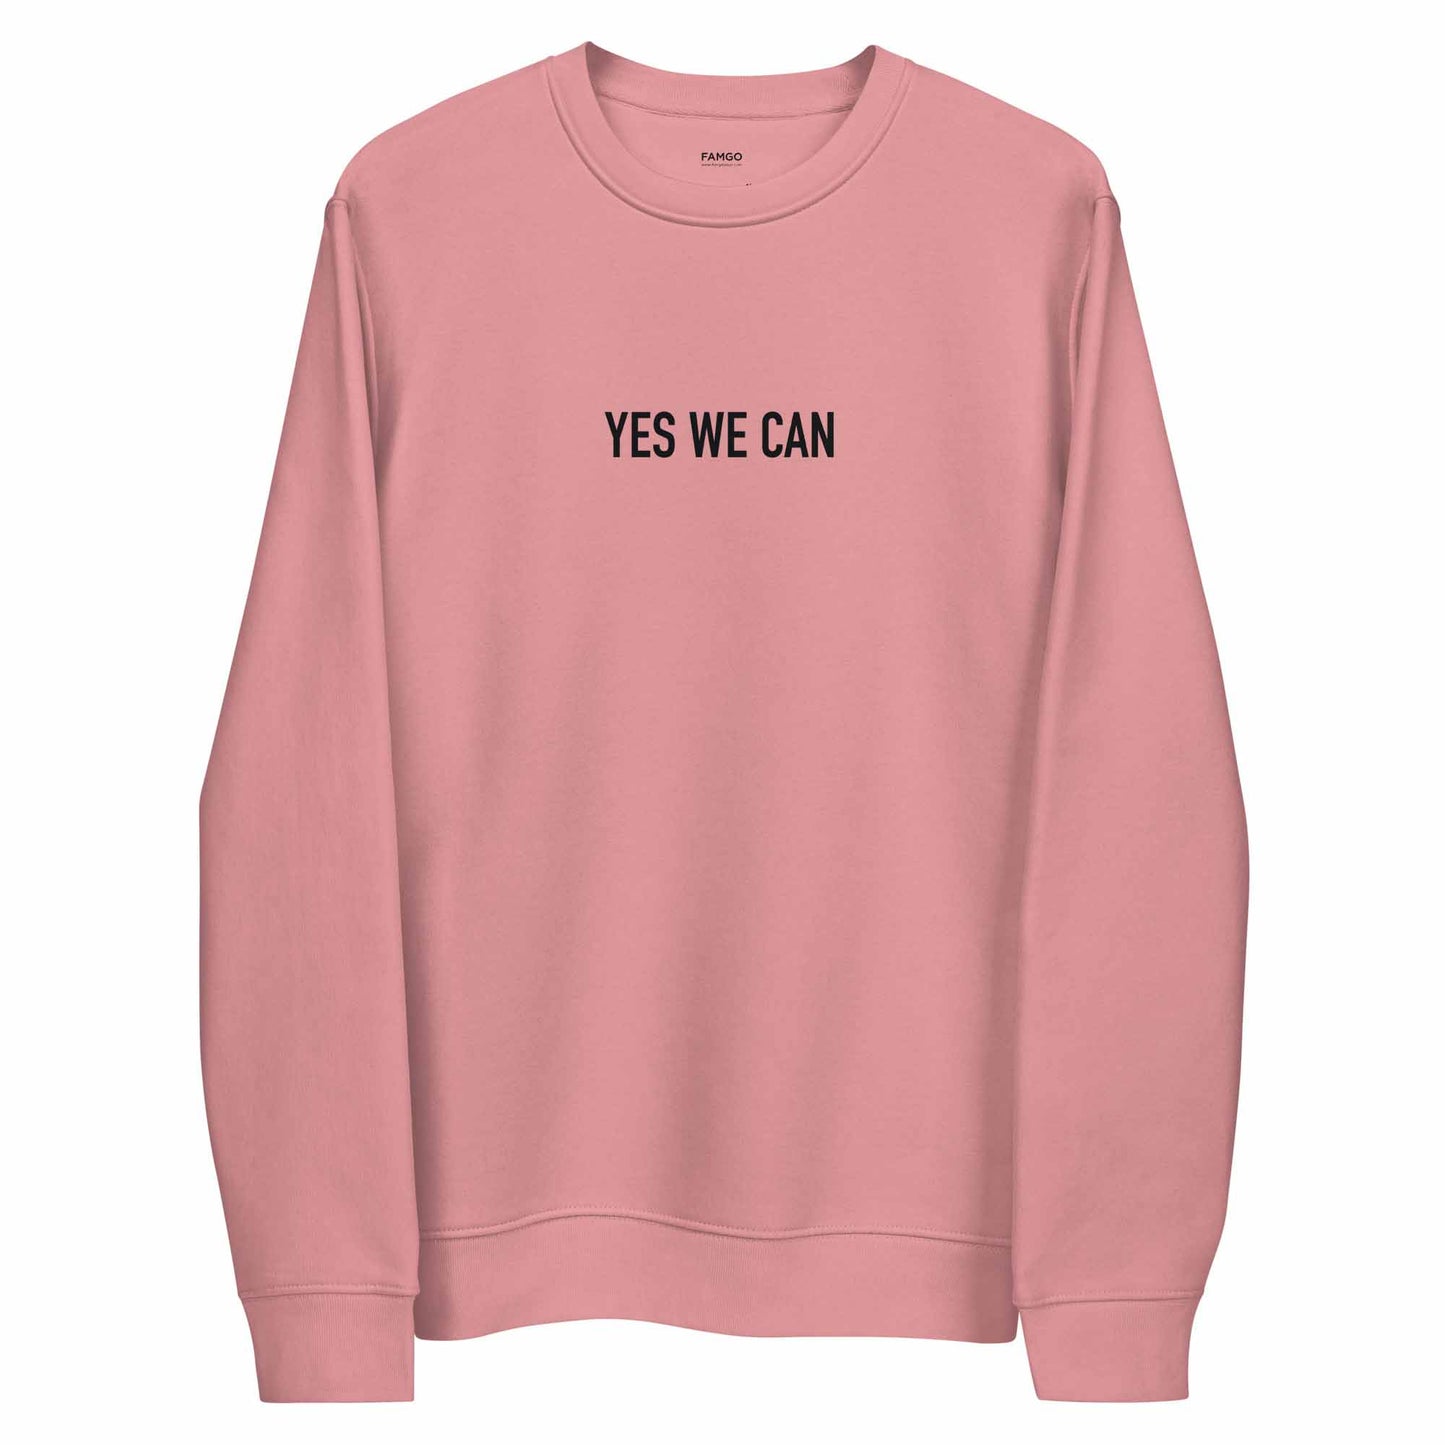 Women pink positive sweatshirt with Barack Obama's inspirational quote, "Yes We Can." 